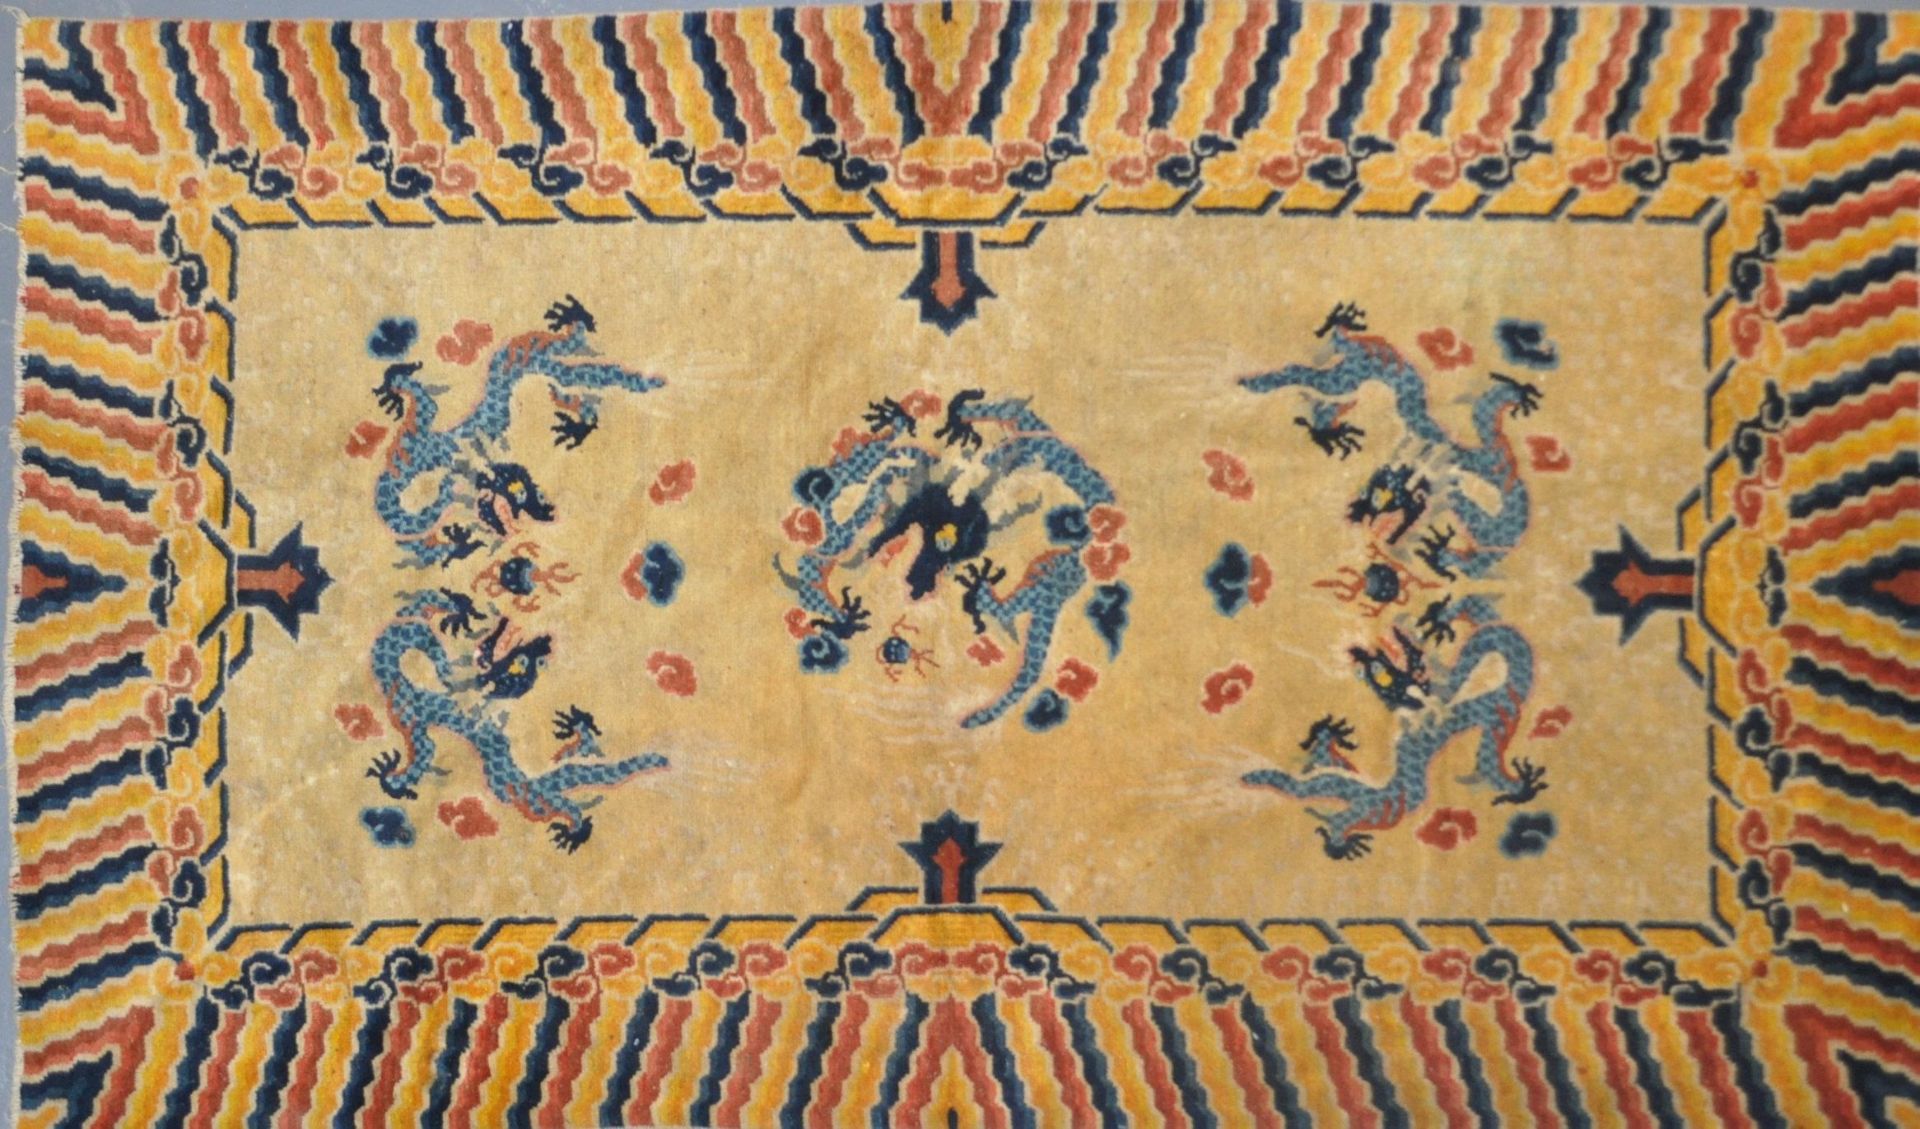 EARLY 20TH CENTURY CHINESE NINGXIA CARPET FLOOR RUG